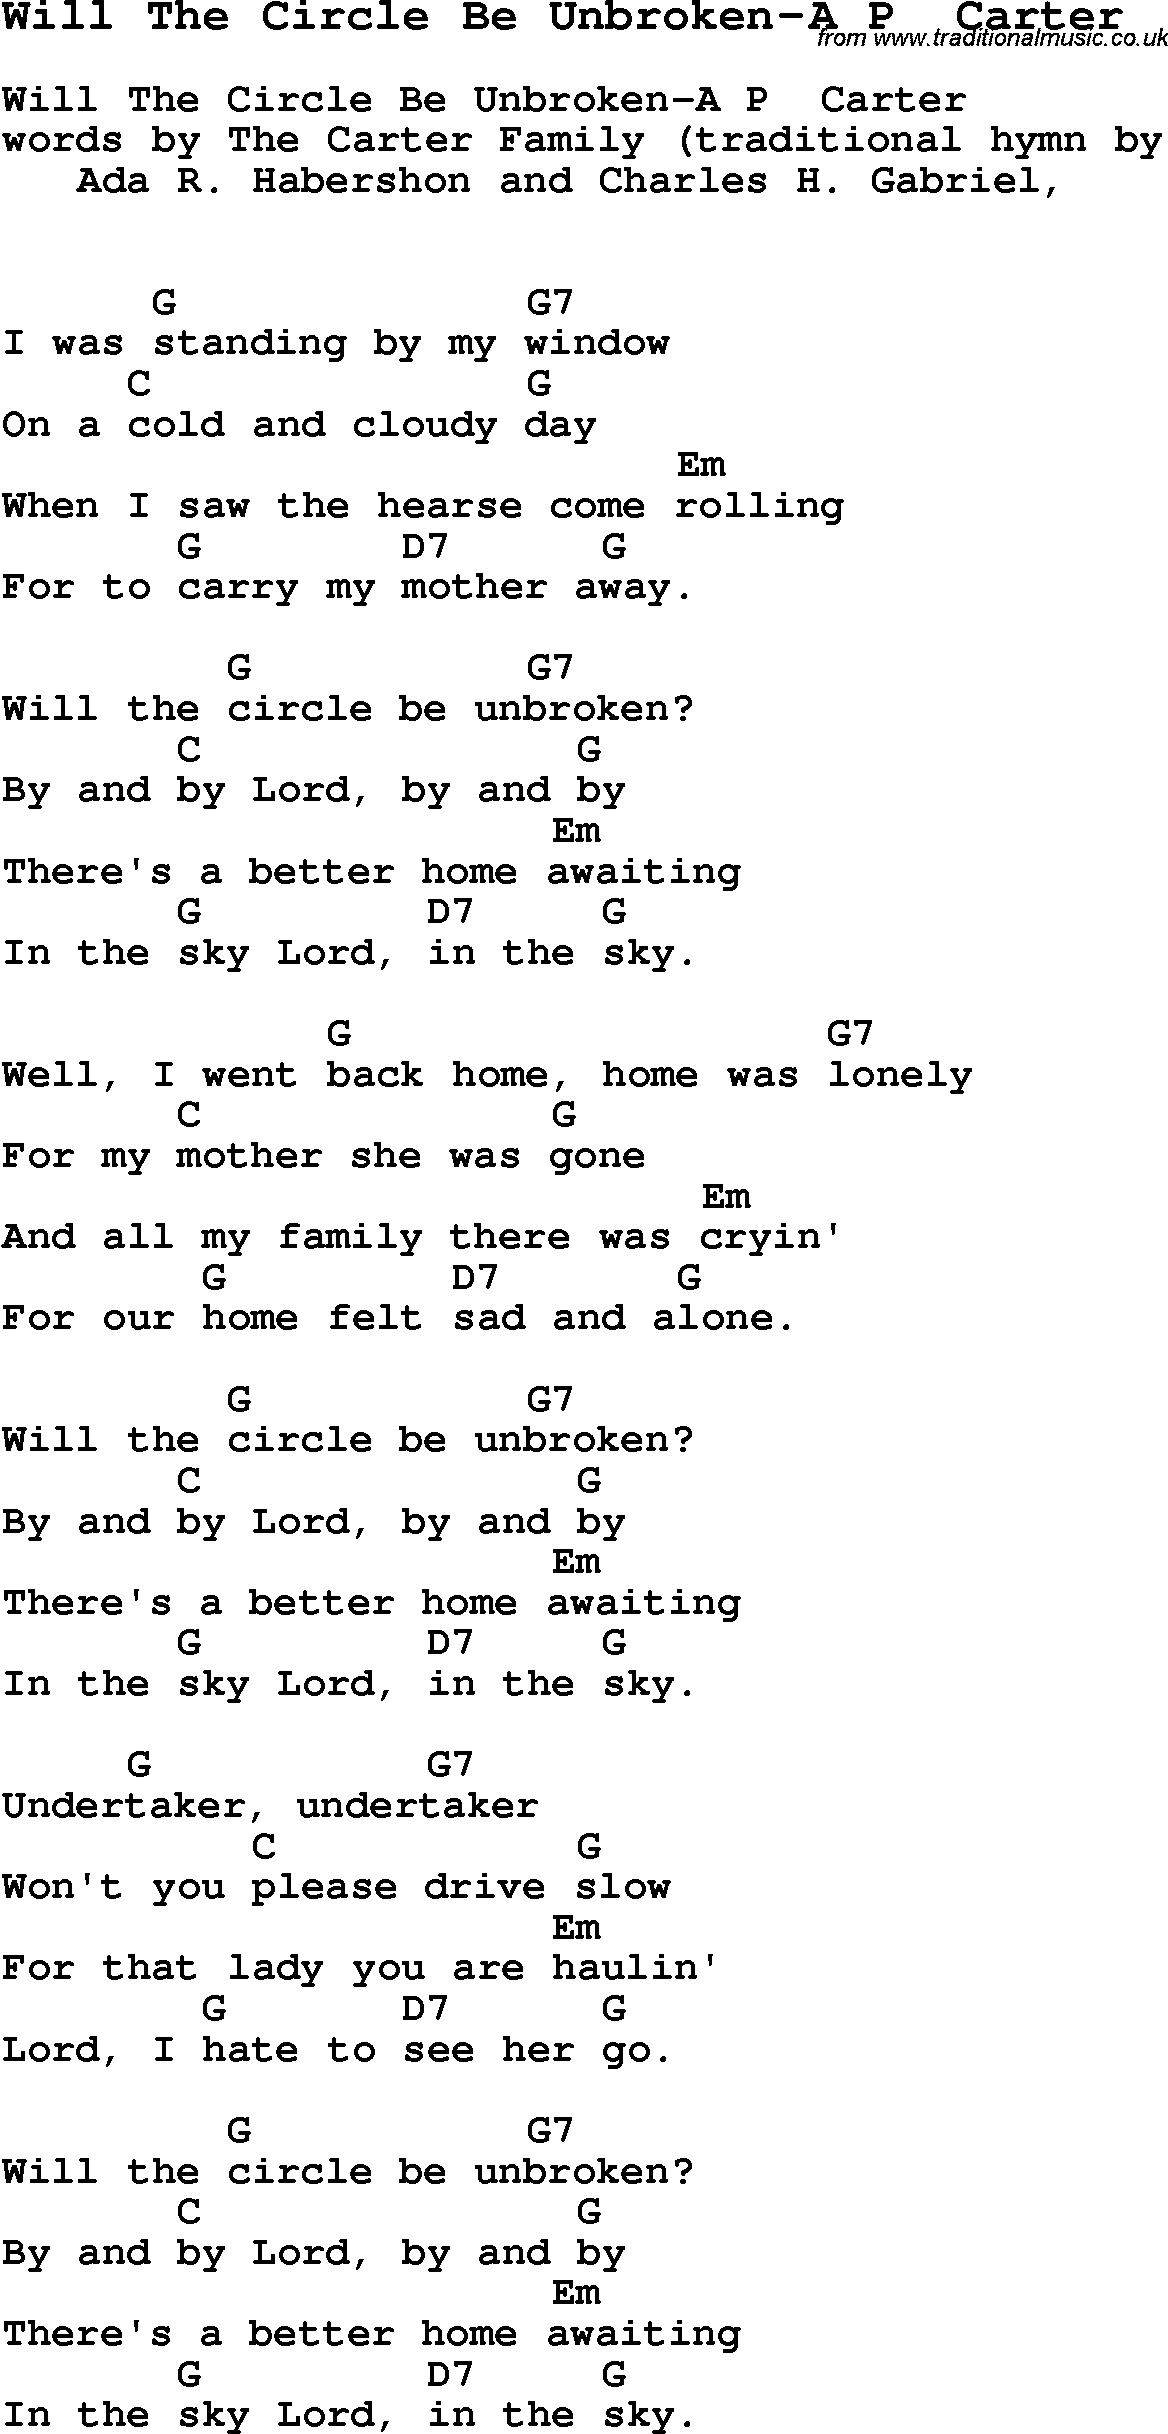 Summer-Camp Song, Will The Circle Be Unbroken-A P  Carter, with lyrics and chords for Ukulele, Guitar Banjo etc.